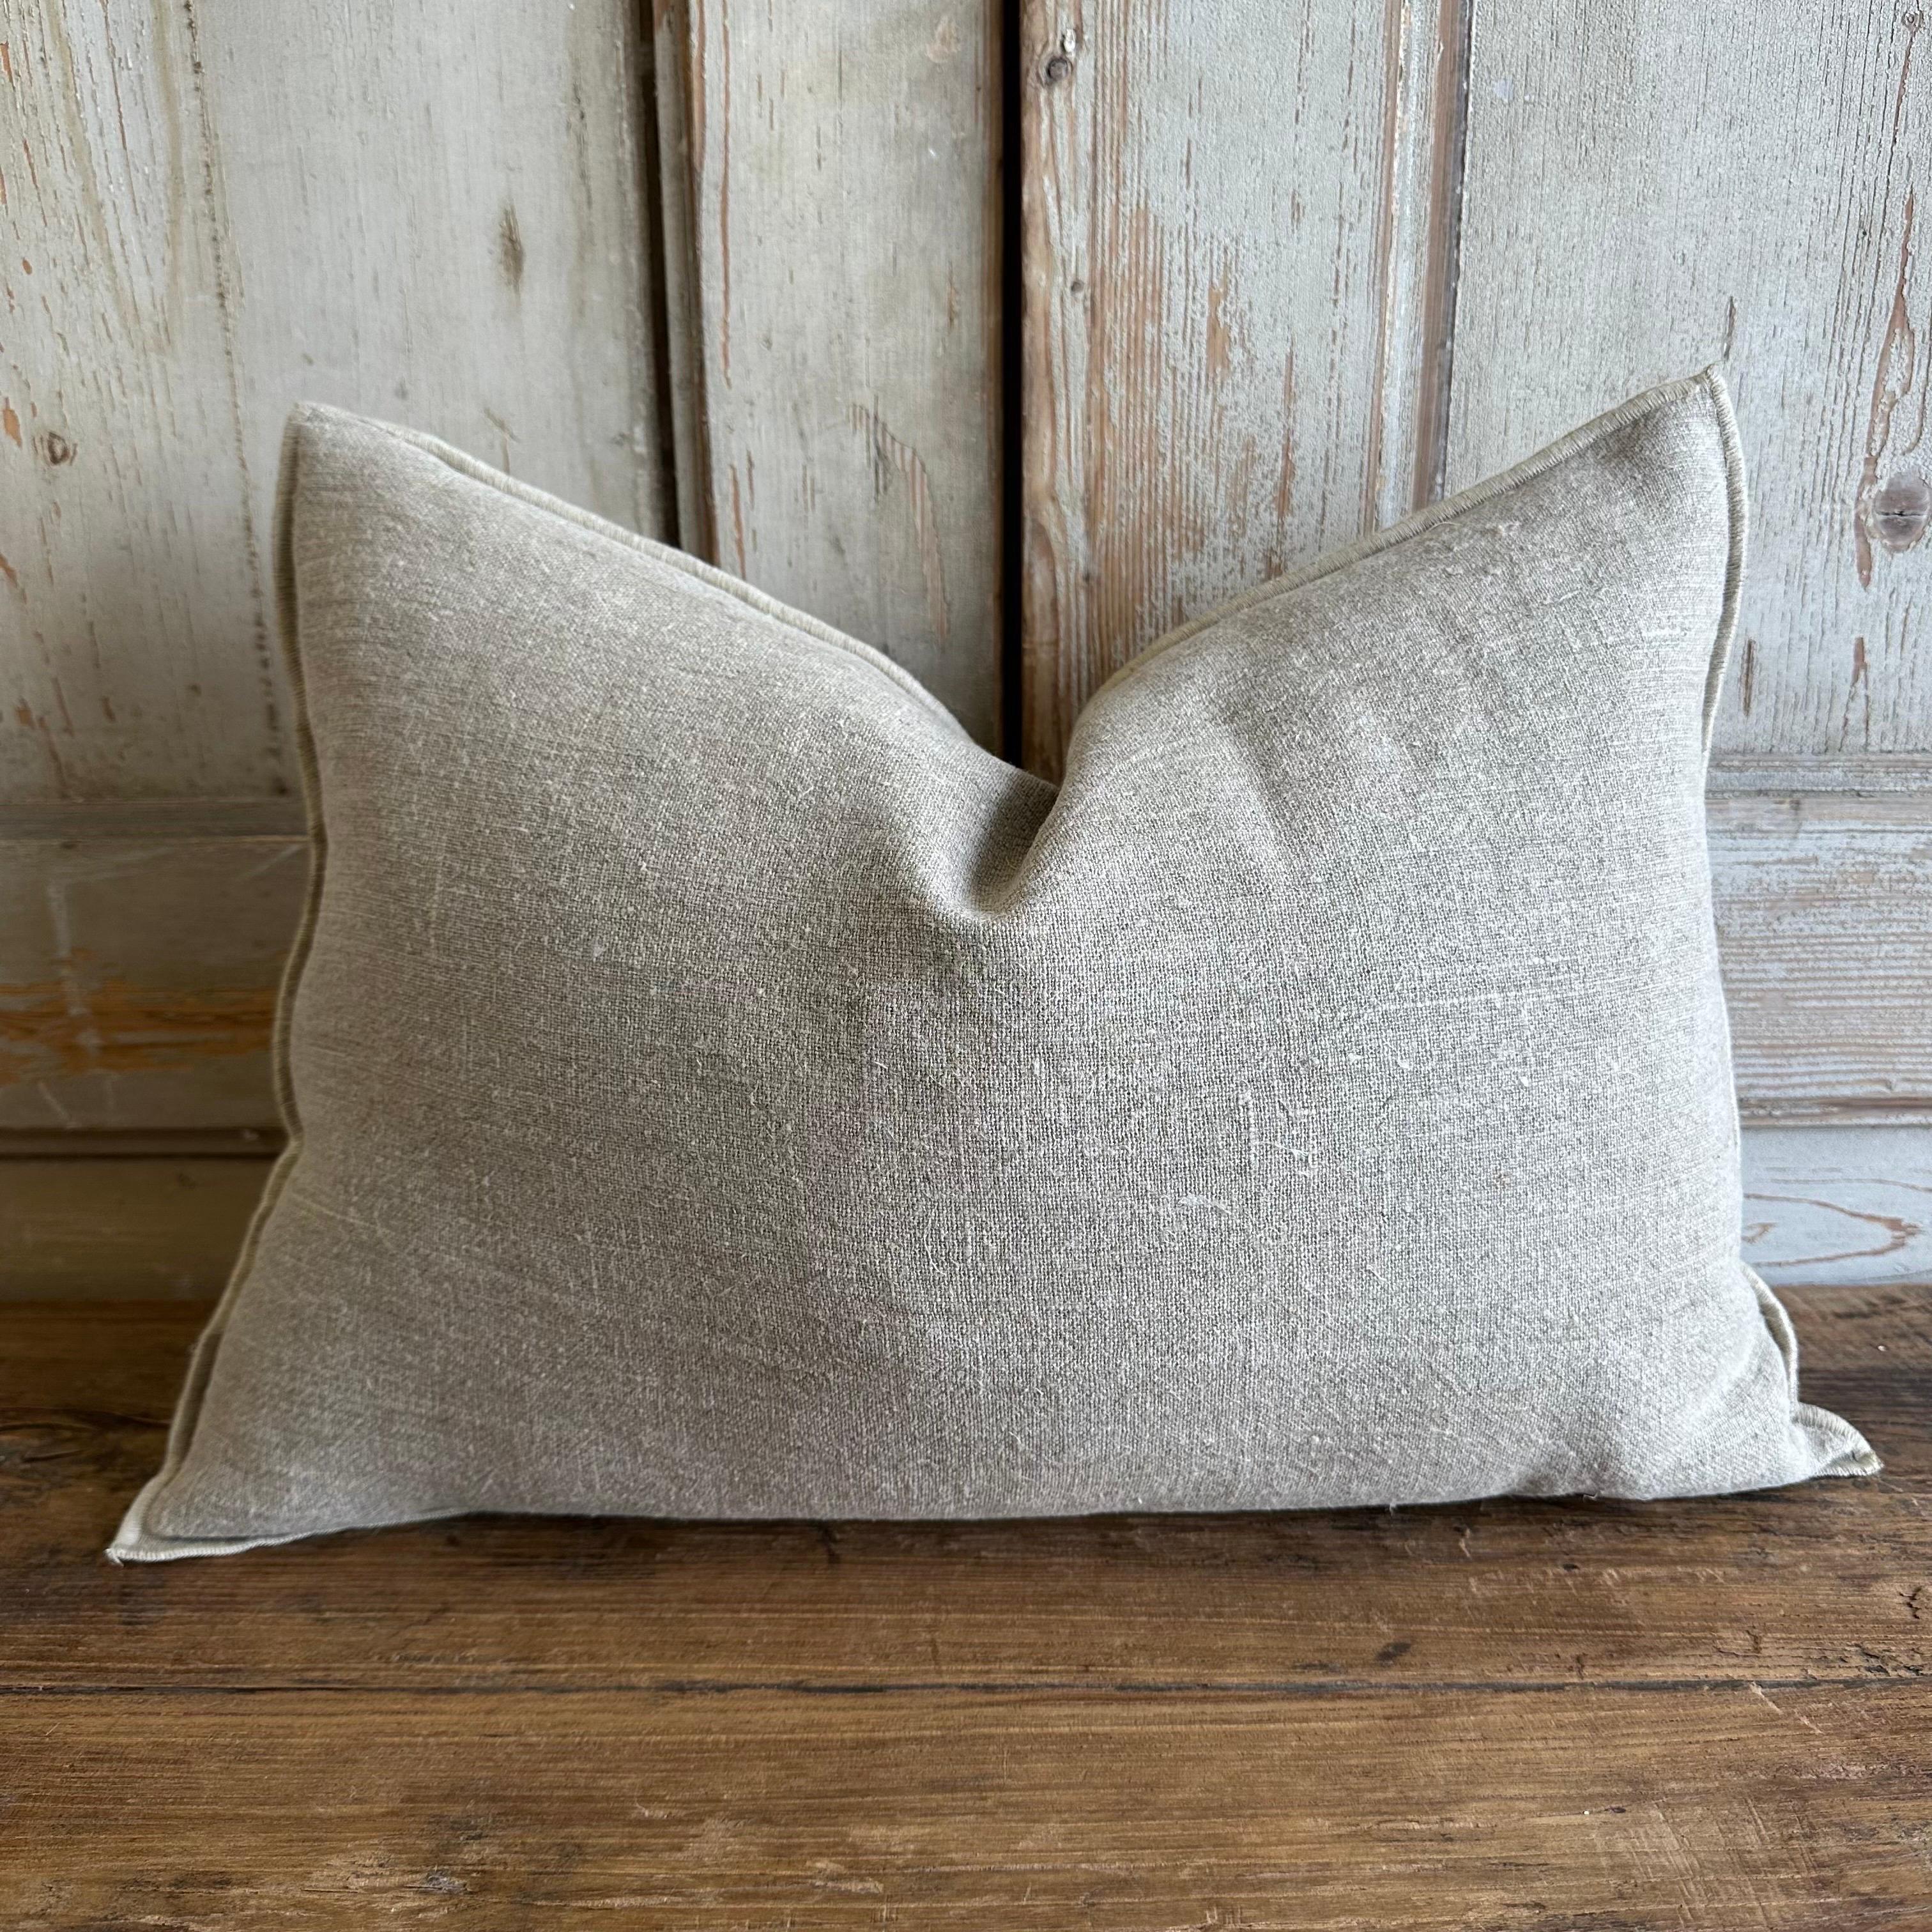 A beautiful 100% linen pillow with decorative stitched edge. Zipper closure, 90/10 down feather pillow is included.
Size: 16x24
Color: Natural
Composition
100% linen, natural finish, european flax label
 